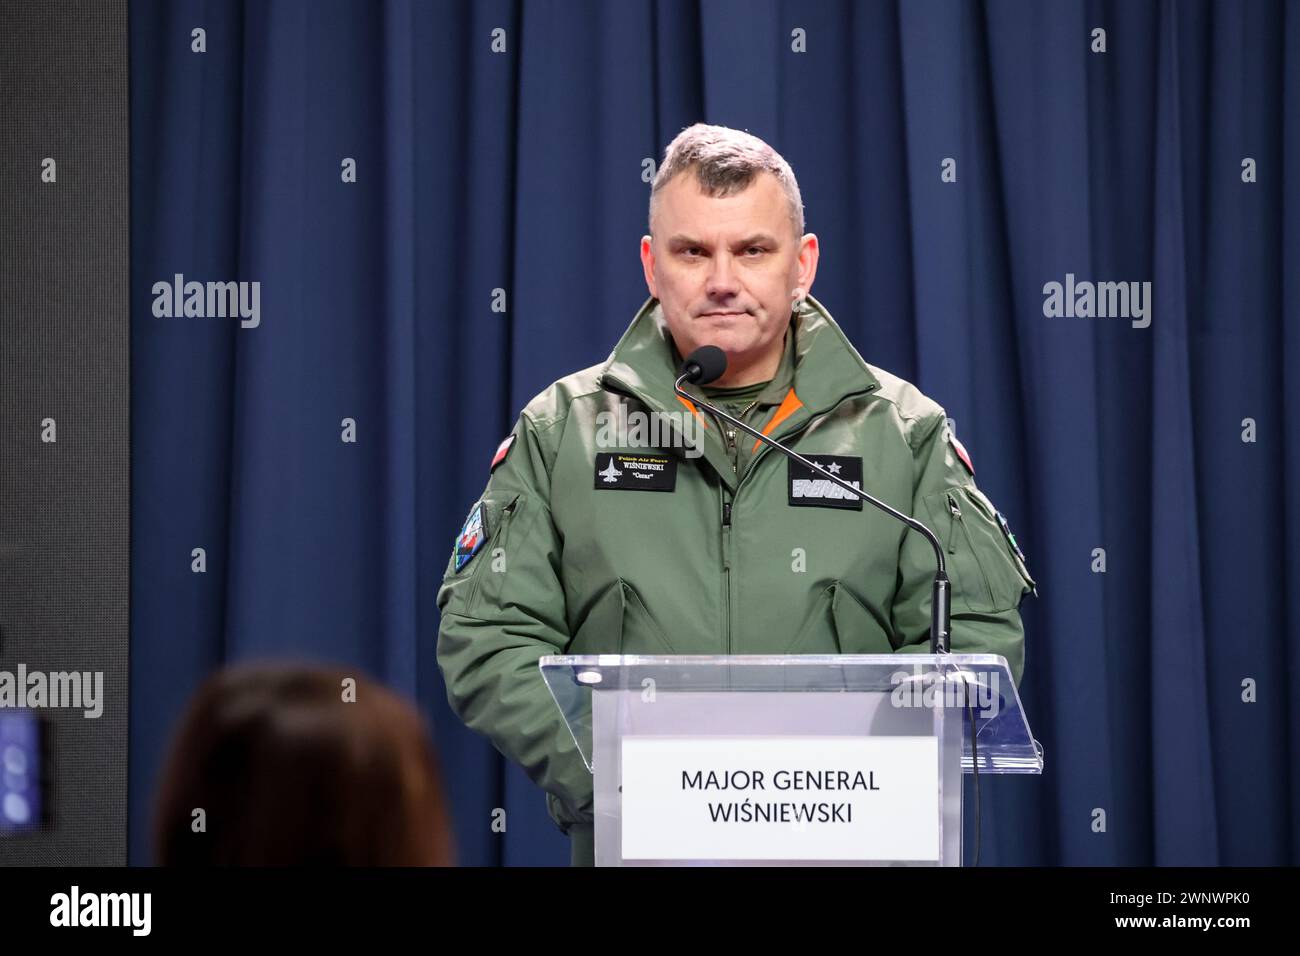 Korzeniewo, Poland on March 4, 2024. Major General Wisniewski speaks during a press conference during NATO's Dragon-24 exercise, a part of large scale Steadfast Defender-24 exercise. The Steadfast Defender-2 exercises, which will take place mainly in Central Europe, will involve some 90,000 troops from all NATO countries as well as Sweden. Their aim is to deter and present defend abilities in the face of aggression. Stock Photo